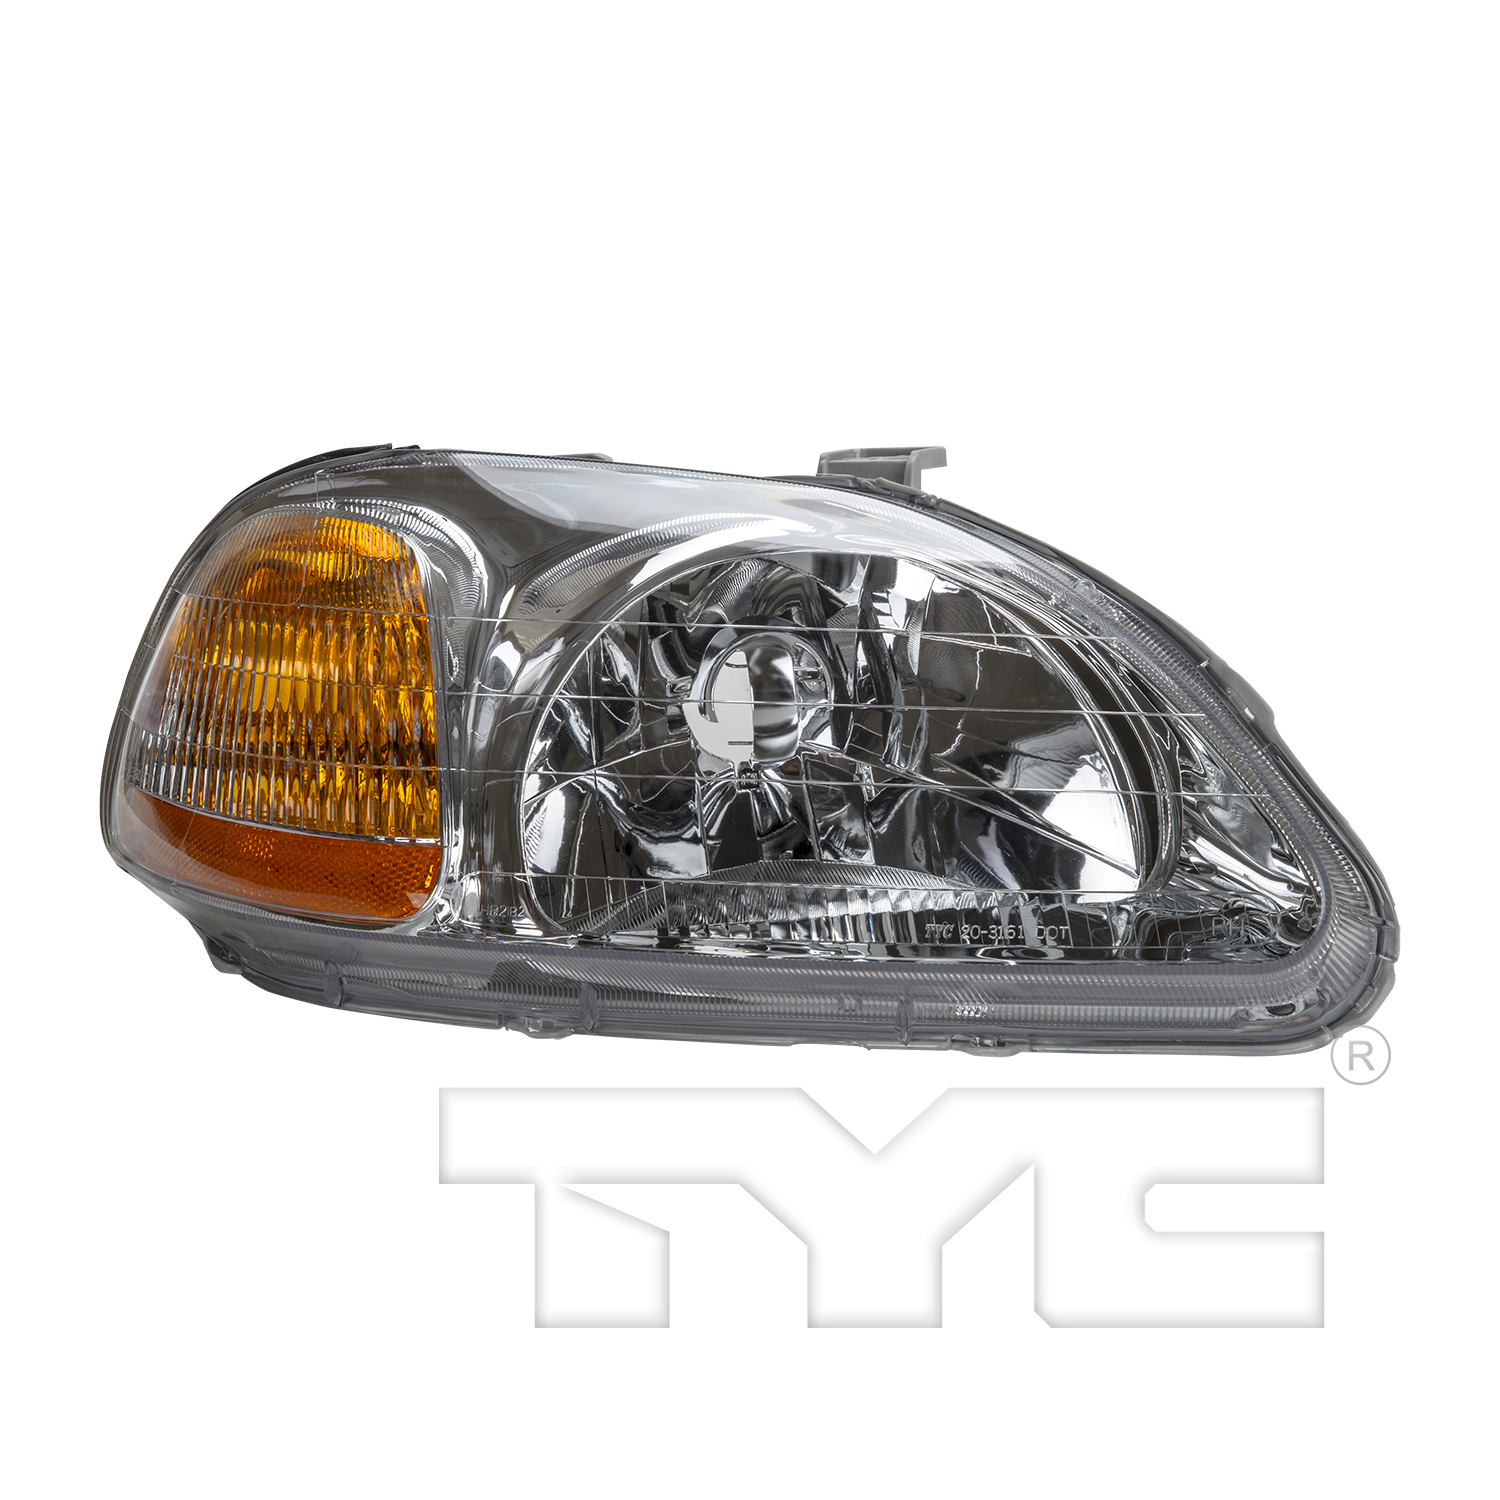 Aftermarket HEADLIGHTS for HONDA - CIVIC, CIVIC,96-98,RT Headlamp assy composite